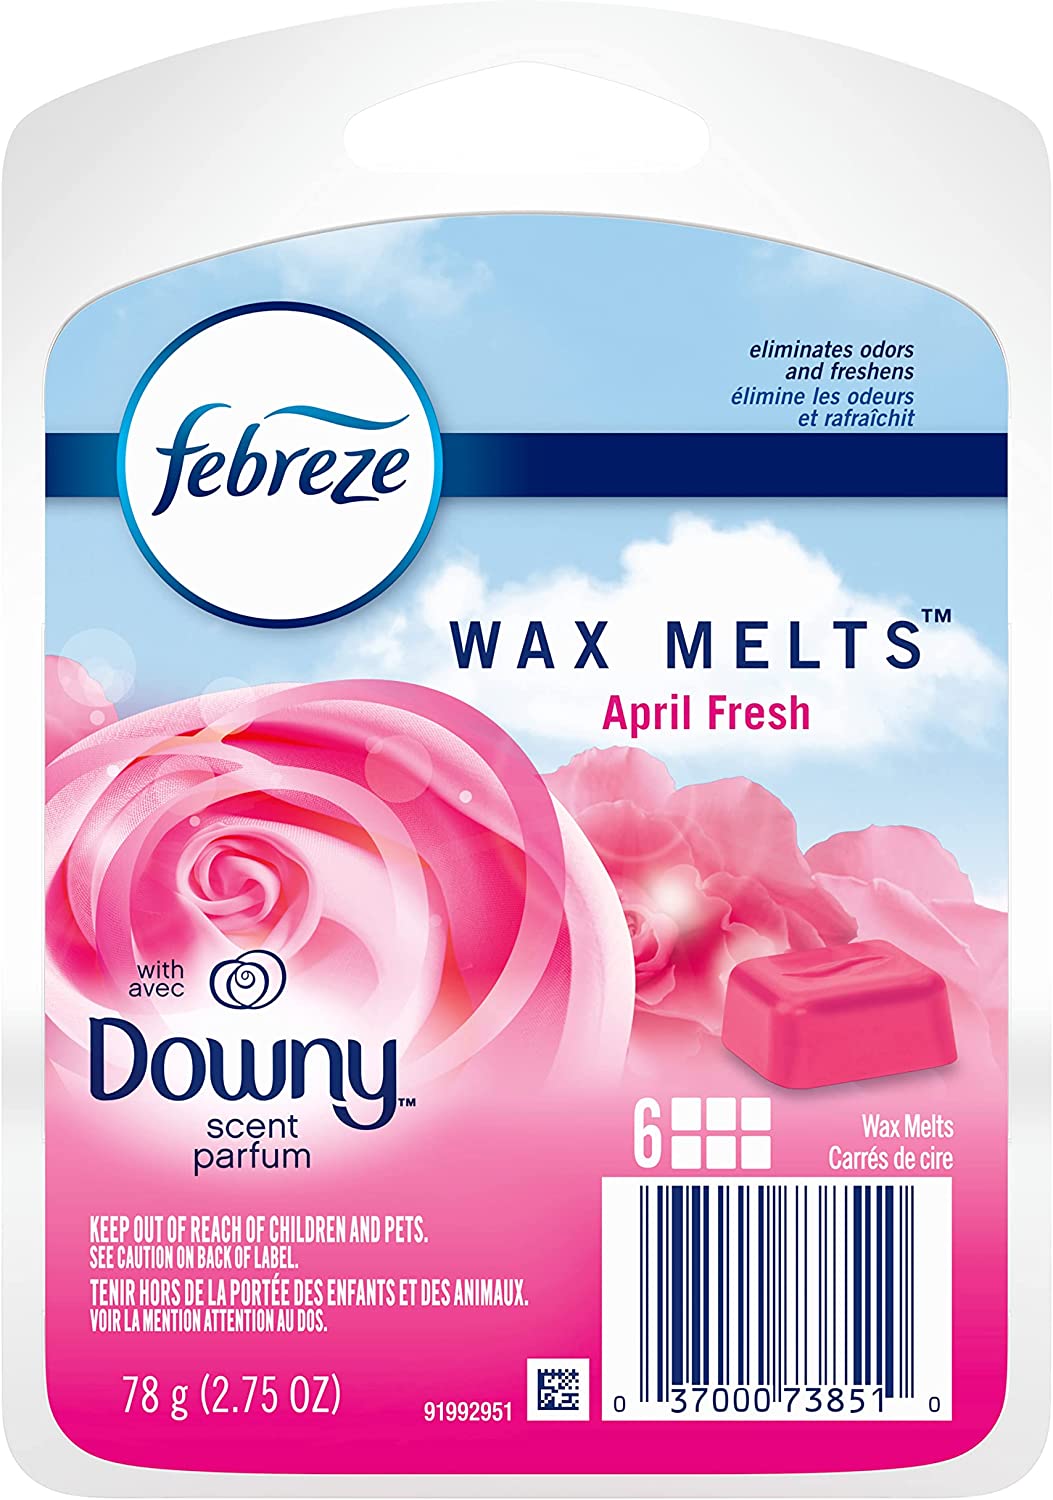  Febreze Unstopables Premium Wax Melts - Fresh Scent - 8 Count Wax  Melts Per Package - Net Wt. 3 OZ (85 g) Per Package - Pack of 3 Packages :  Health & Household